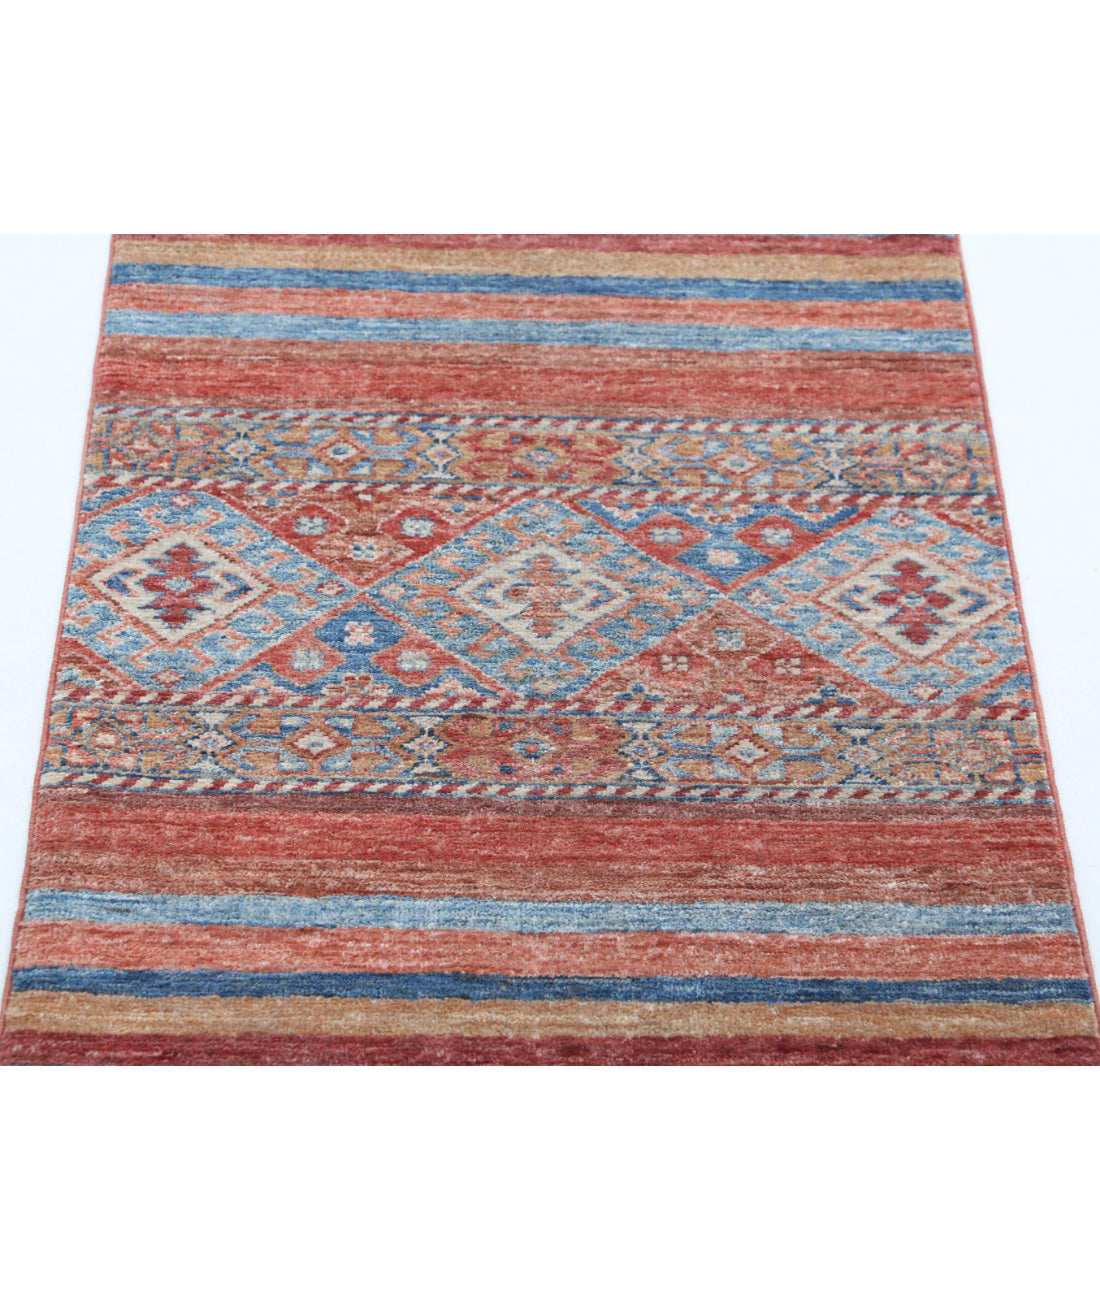 Hand Knotted Khurjeen Wool Rug - 2'2'' x 2'11'' 2'2'' x 2'11'' (65 X 88) / Multi / Multi